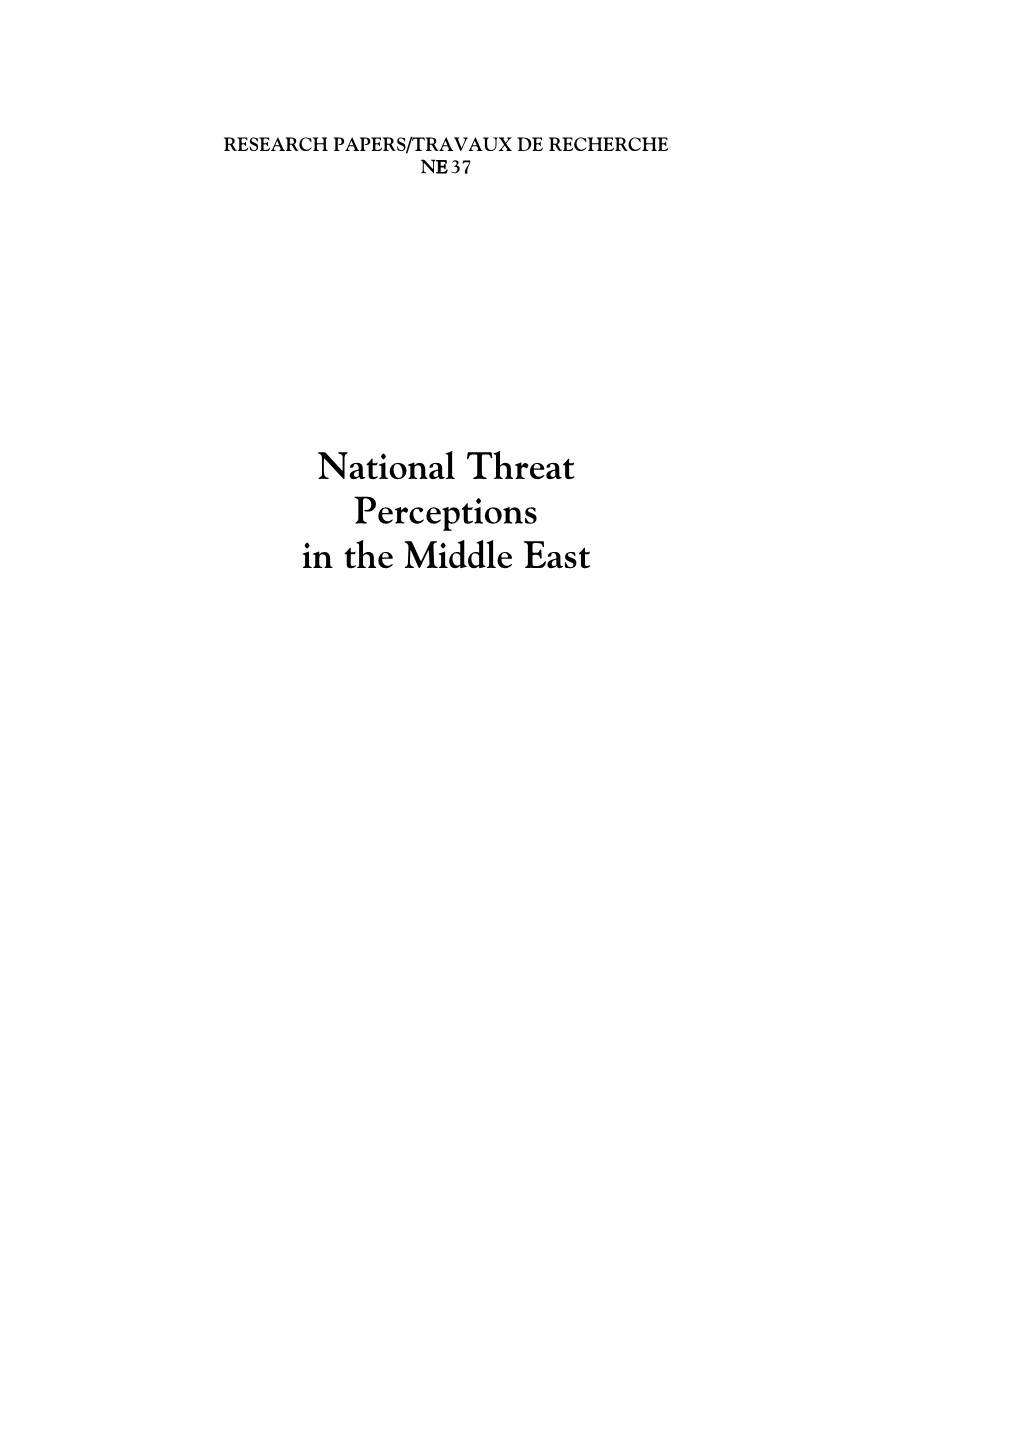 National Threat Perceptions in the Middle East UNIDIR/95/33